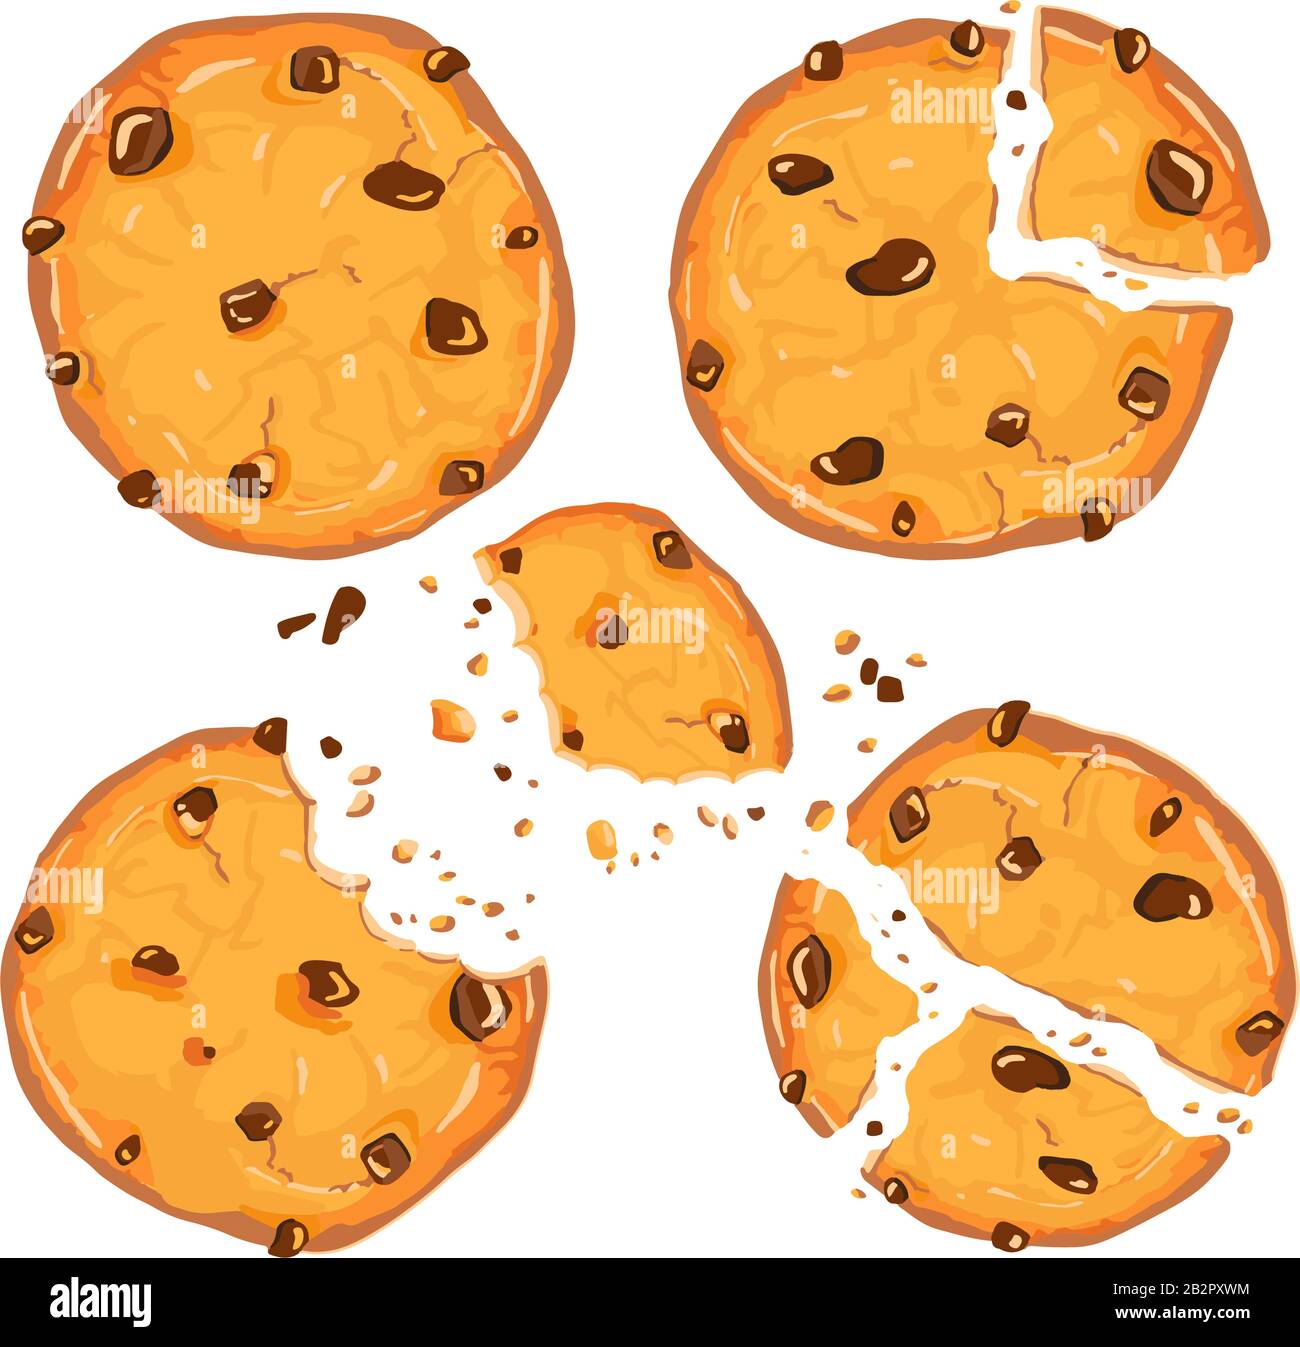 Homemade choco chip cookies with chocolate crisps isolated on white background. Bitten, broken, cookie crumbs. Vector illustration Stock Vector